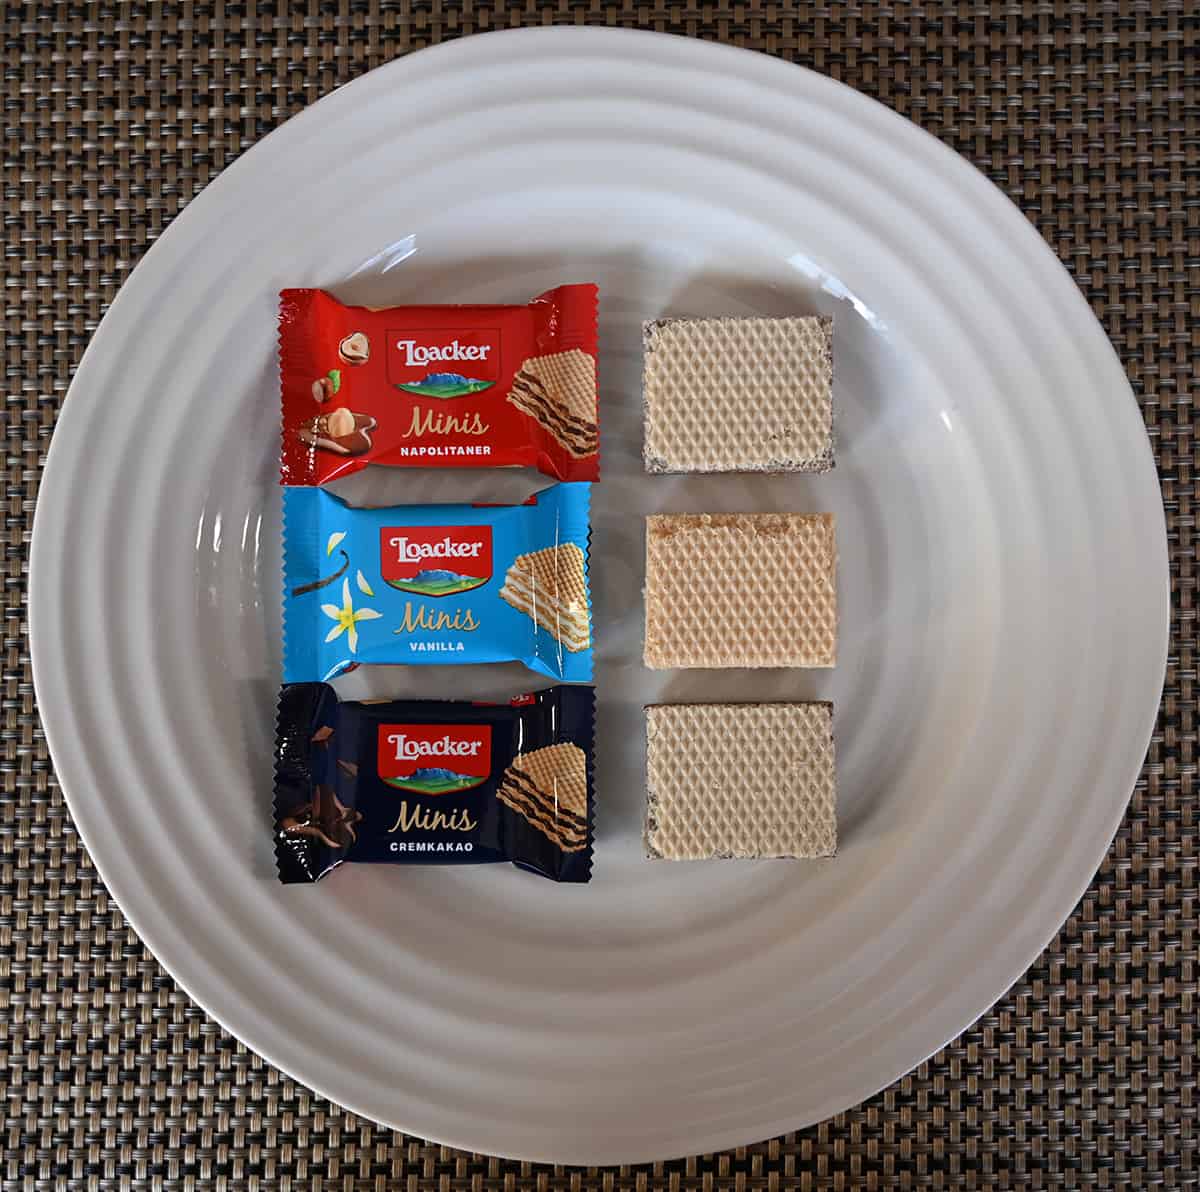 Image of all three flavors of wafer cookies unwrapped and served on a white plate beside their package.